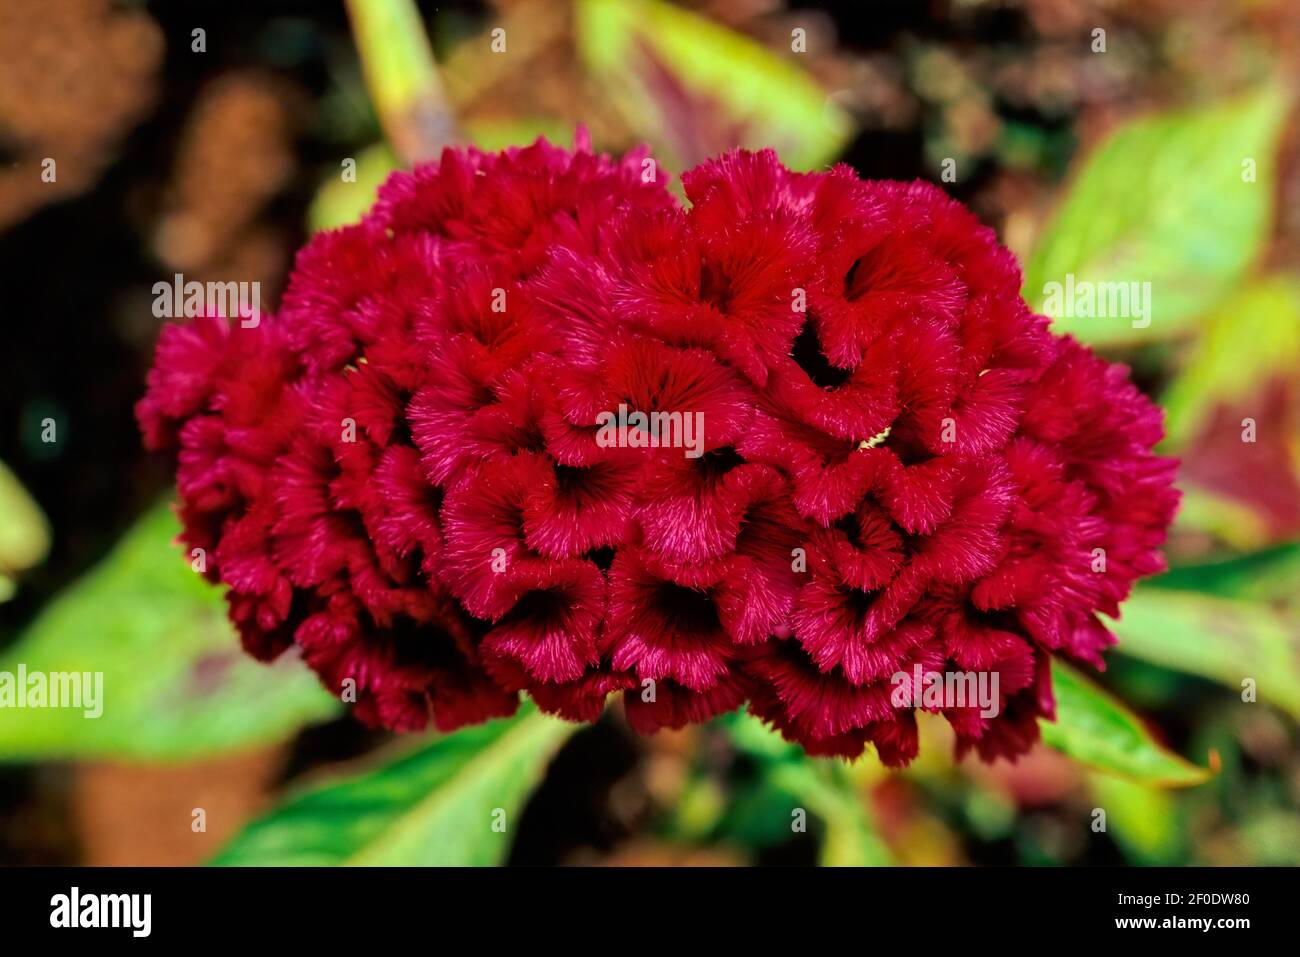 Celosia argentea var. cristata (formerly Celosia cristata), known as cockscomb, is the cristate or crested variety of the species Celosia argentea. Stock Photo